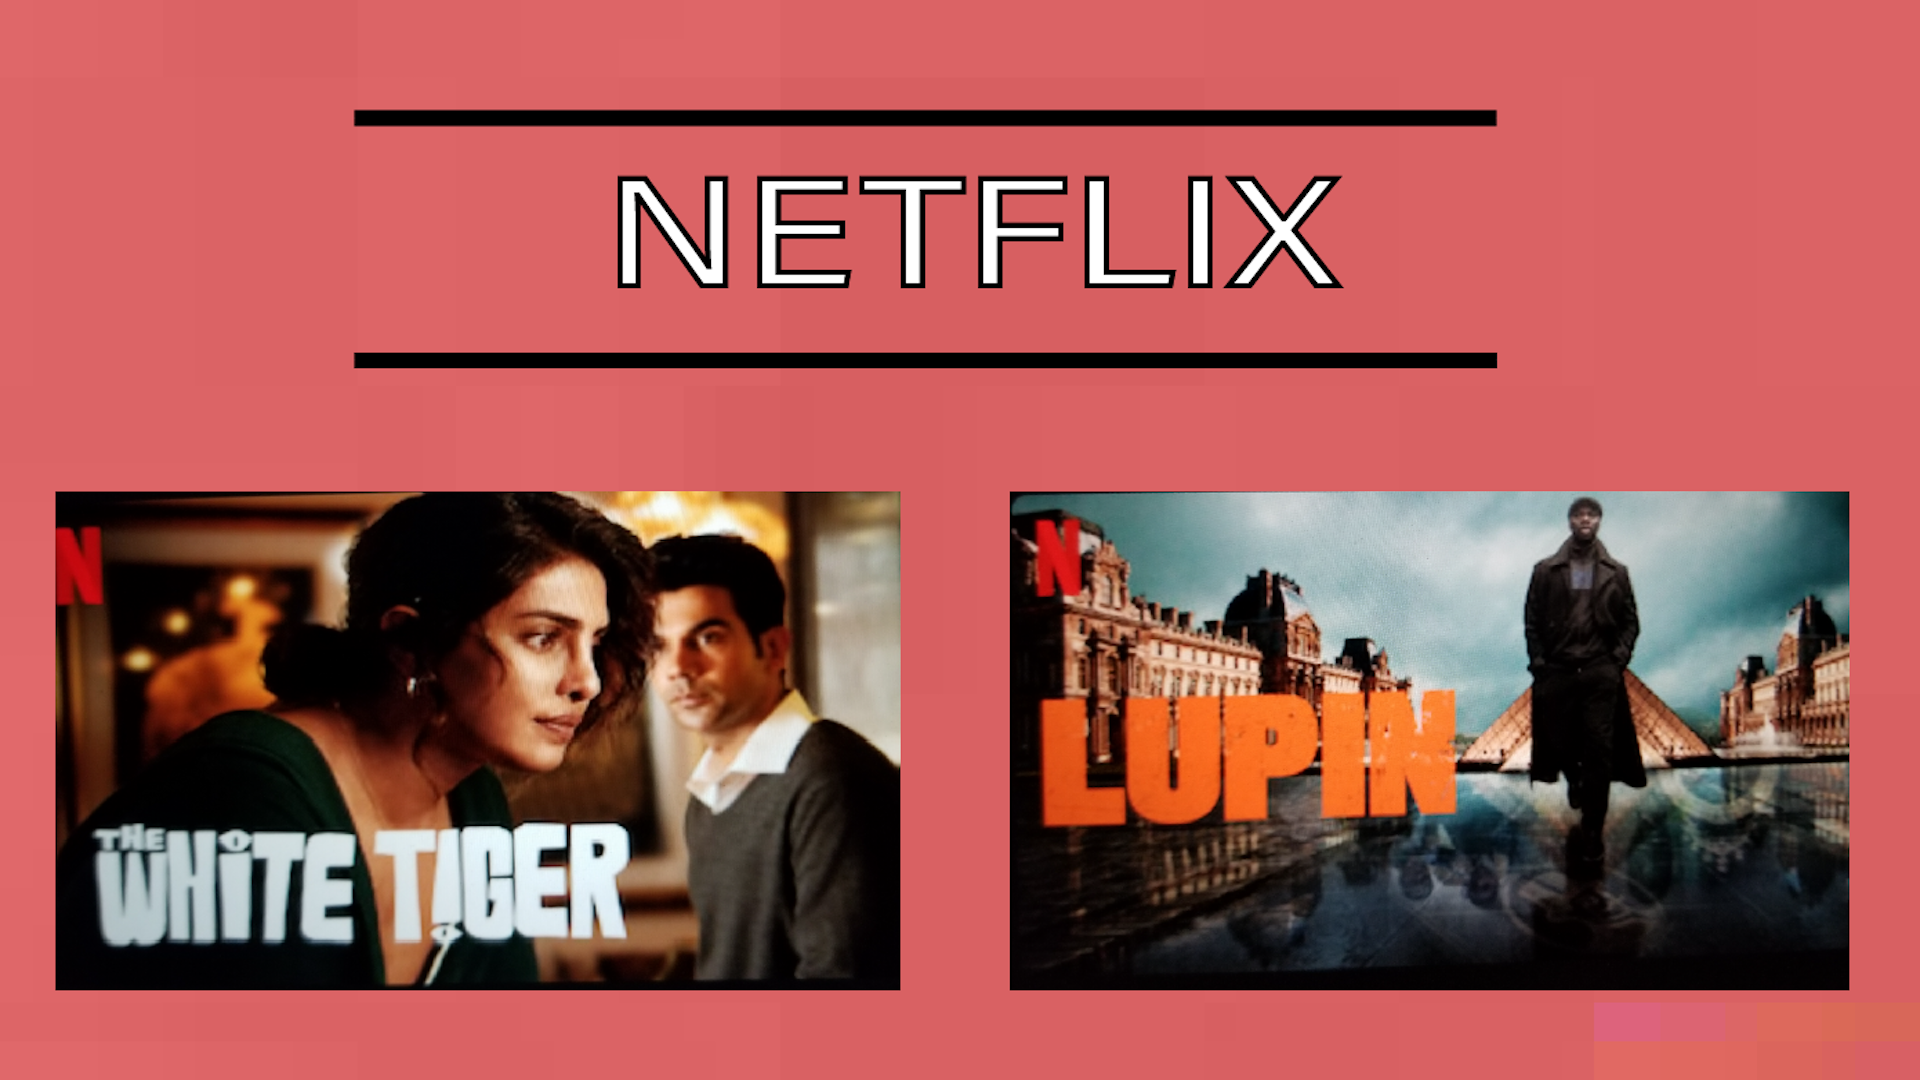 Image of The White Tiger and Lupin screenshots with Netflix text